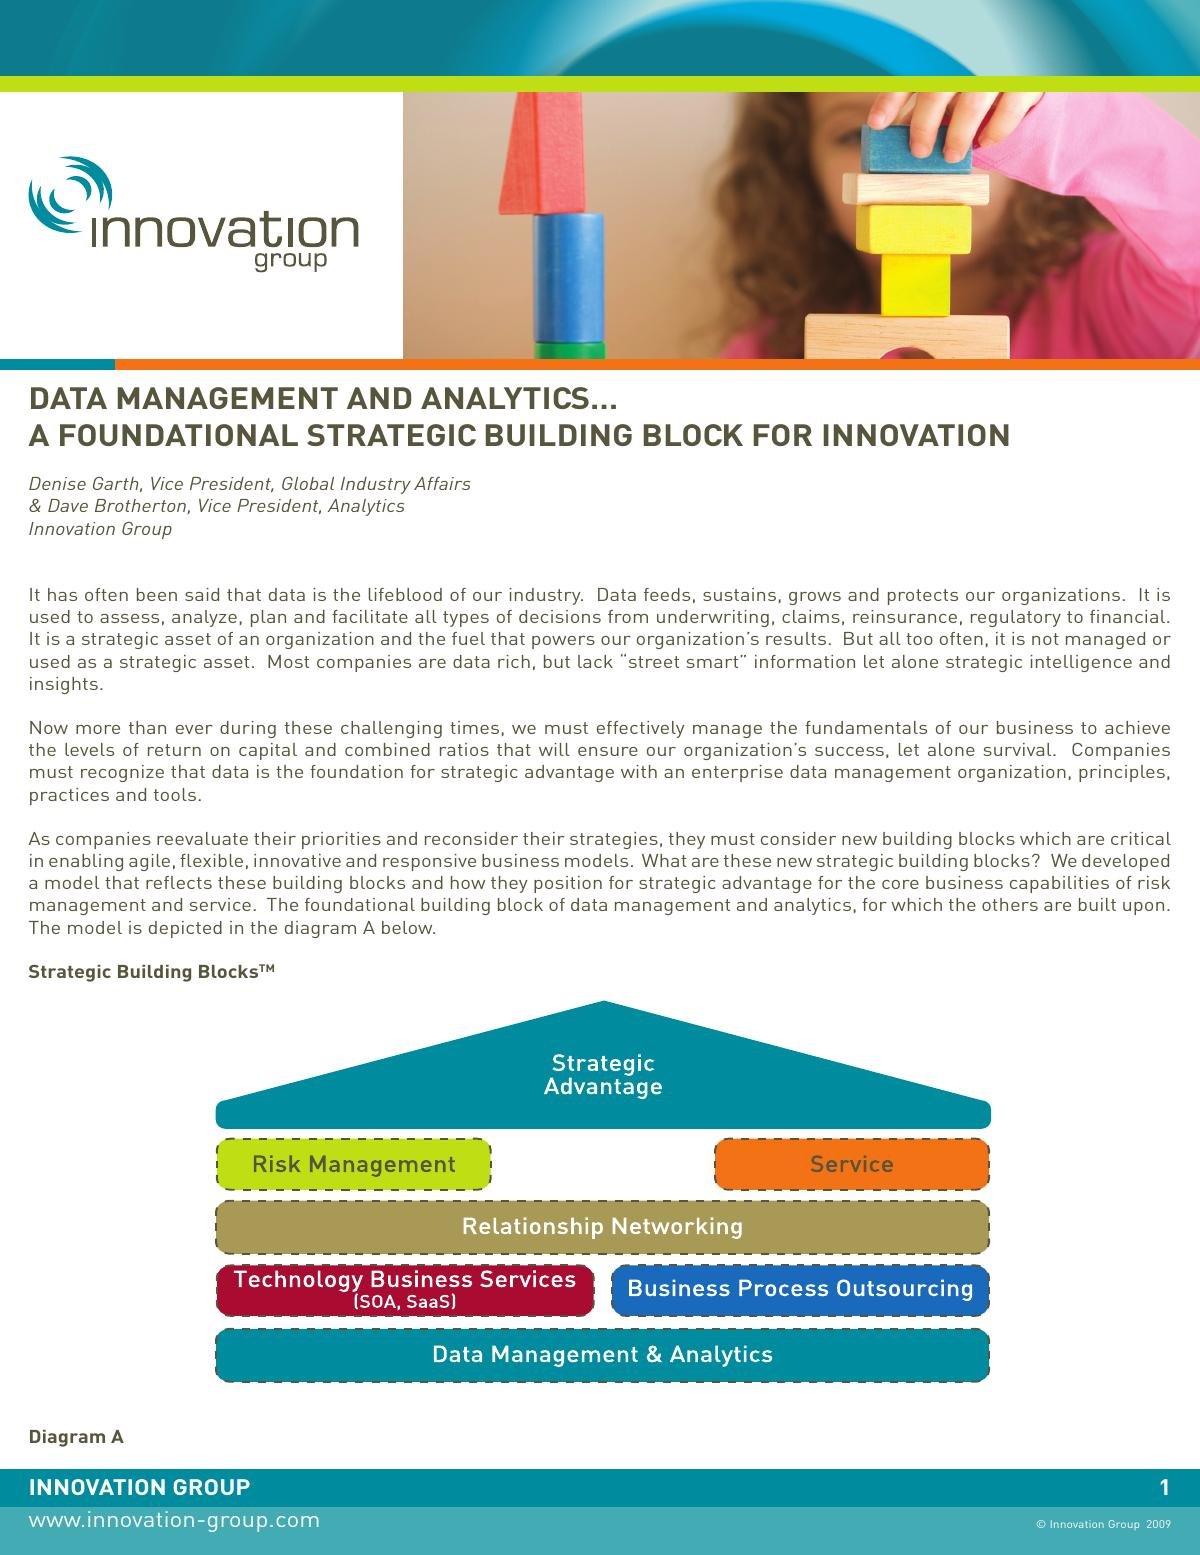 Data Management and Analytics…Foundational Strategic Building Block for Innovation